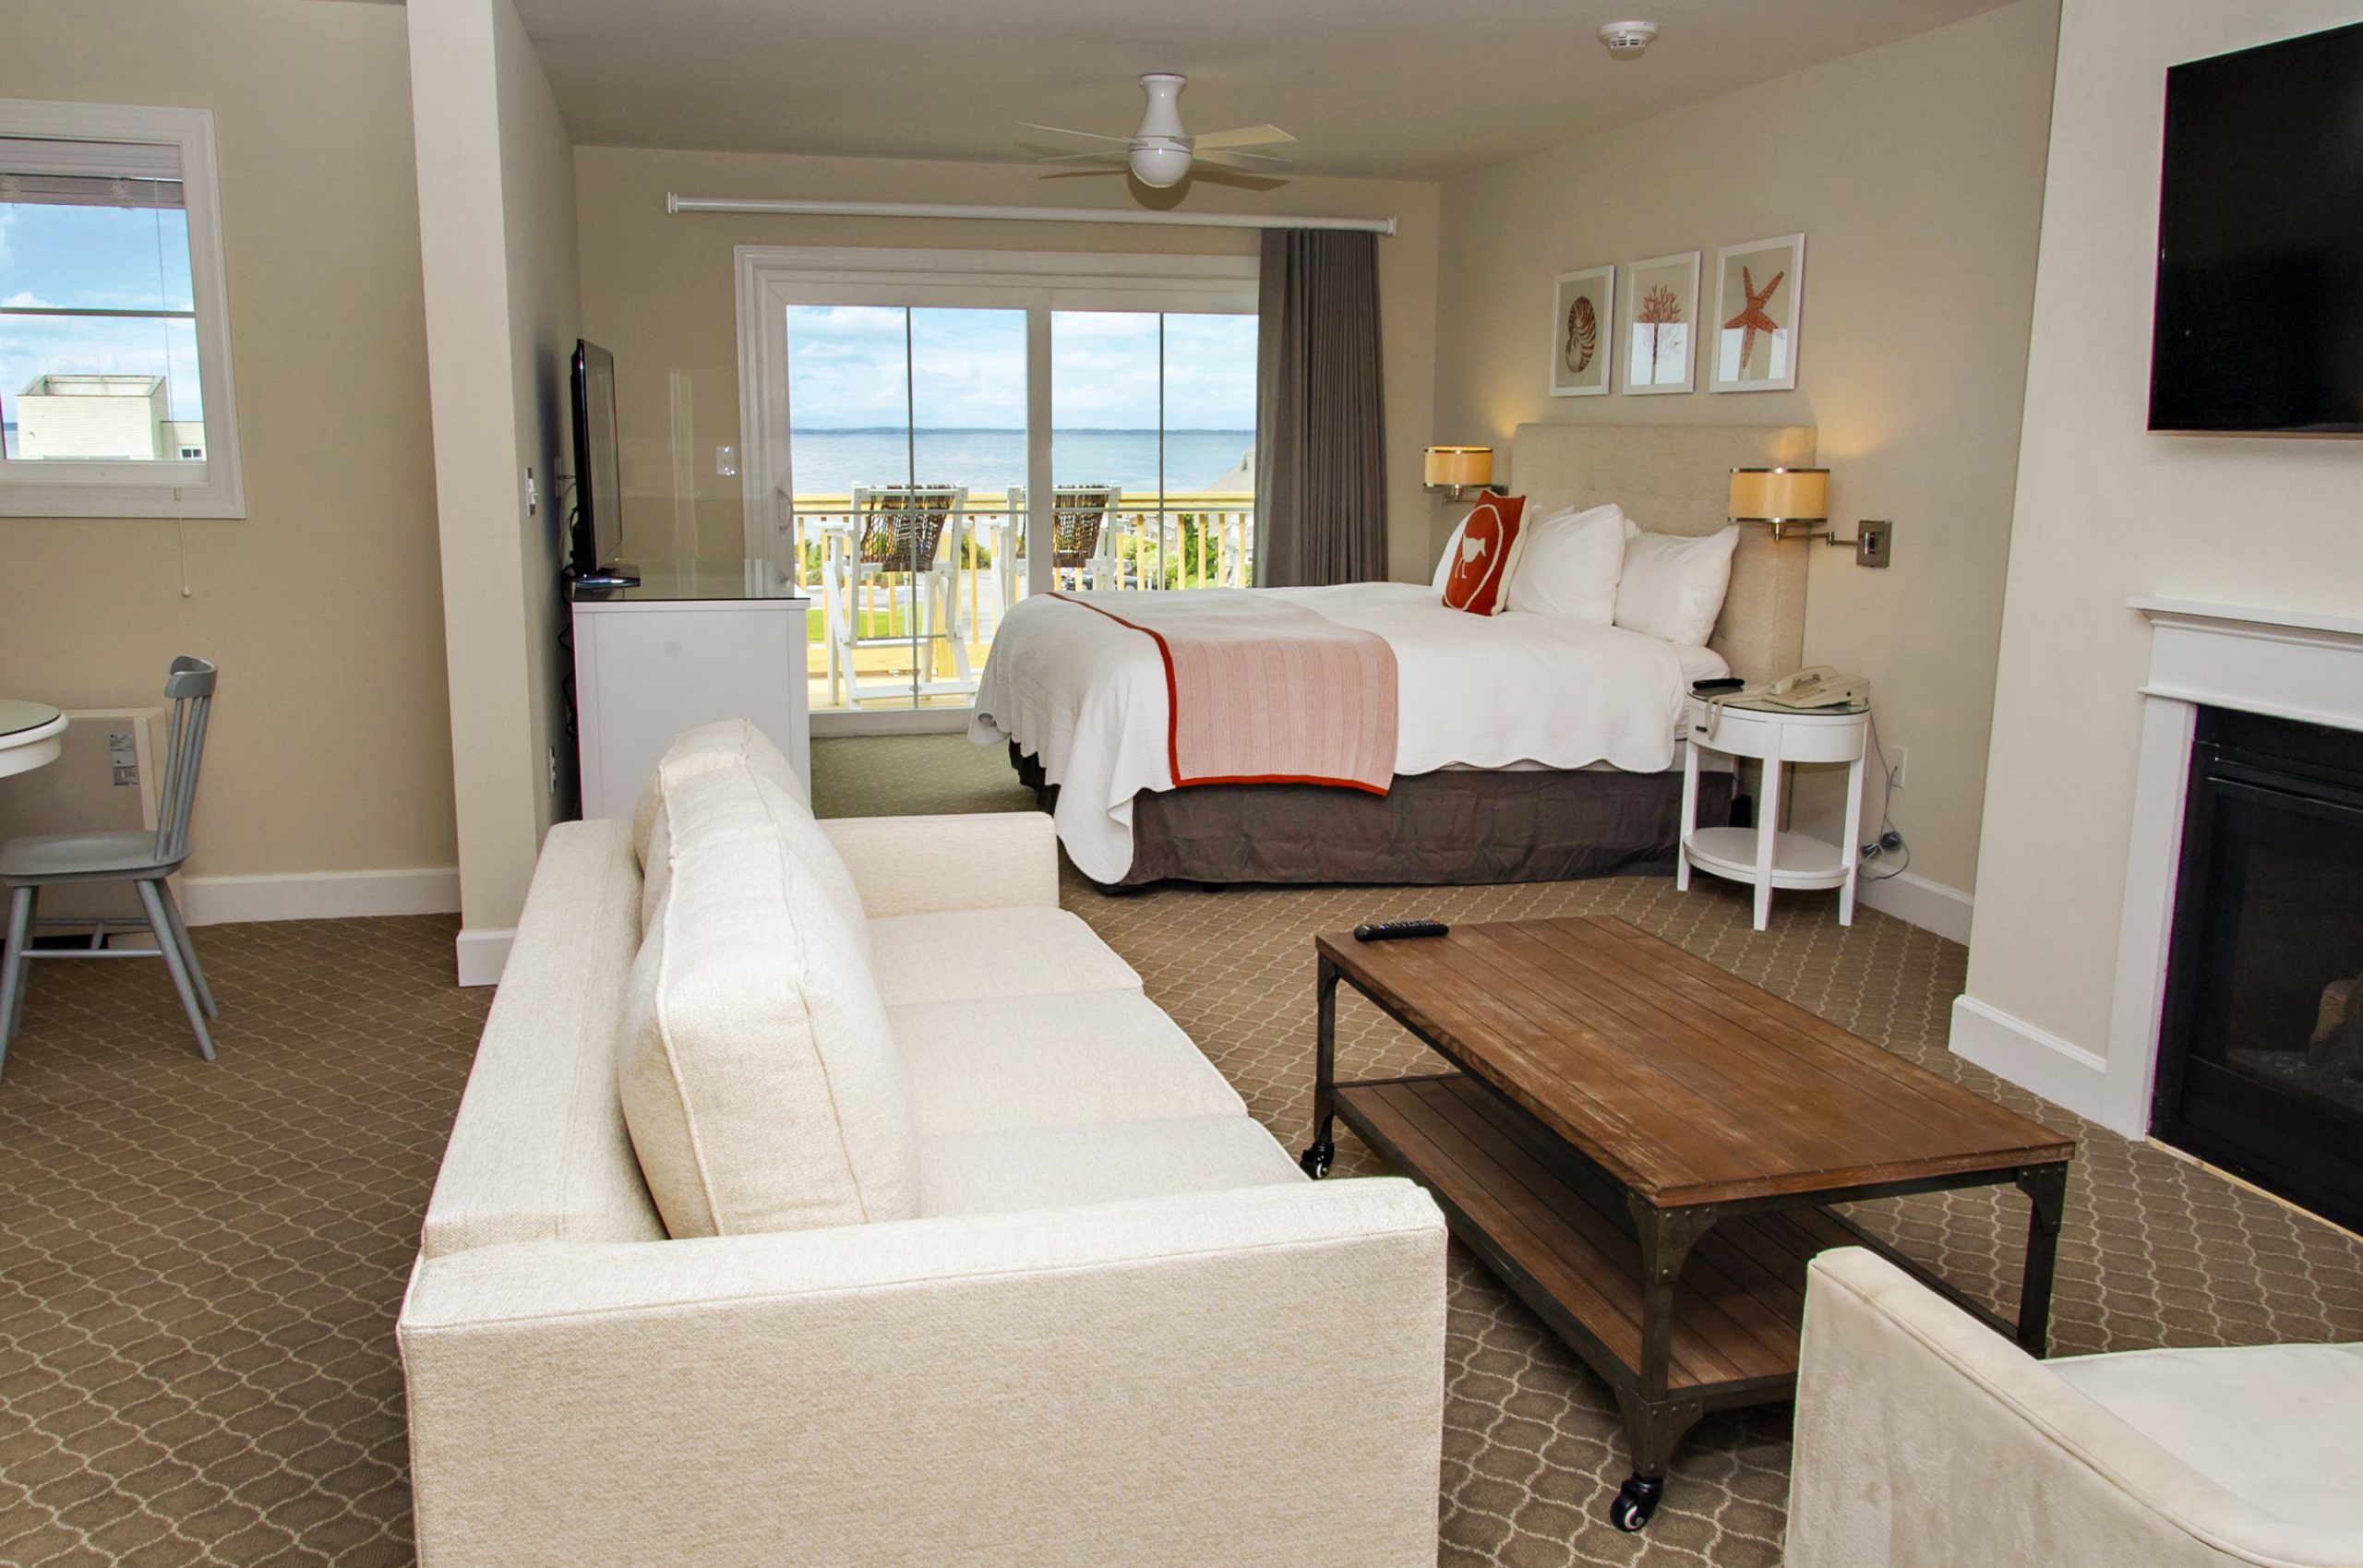 Room interior with couch seating and ocean view